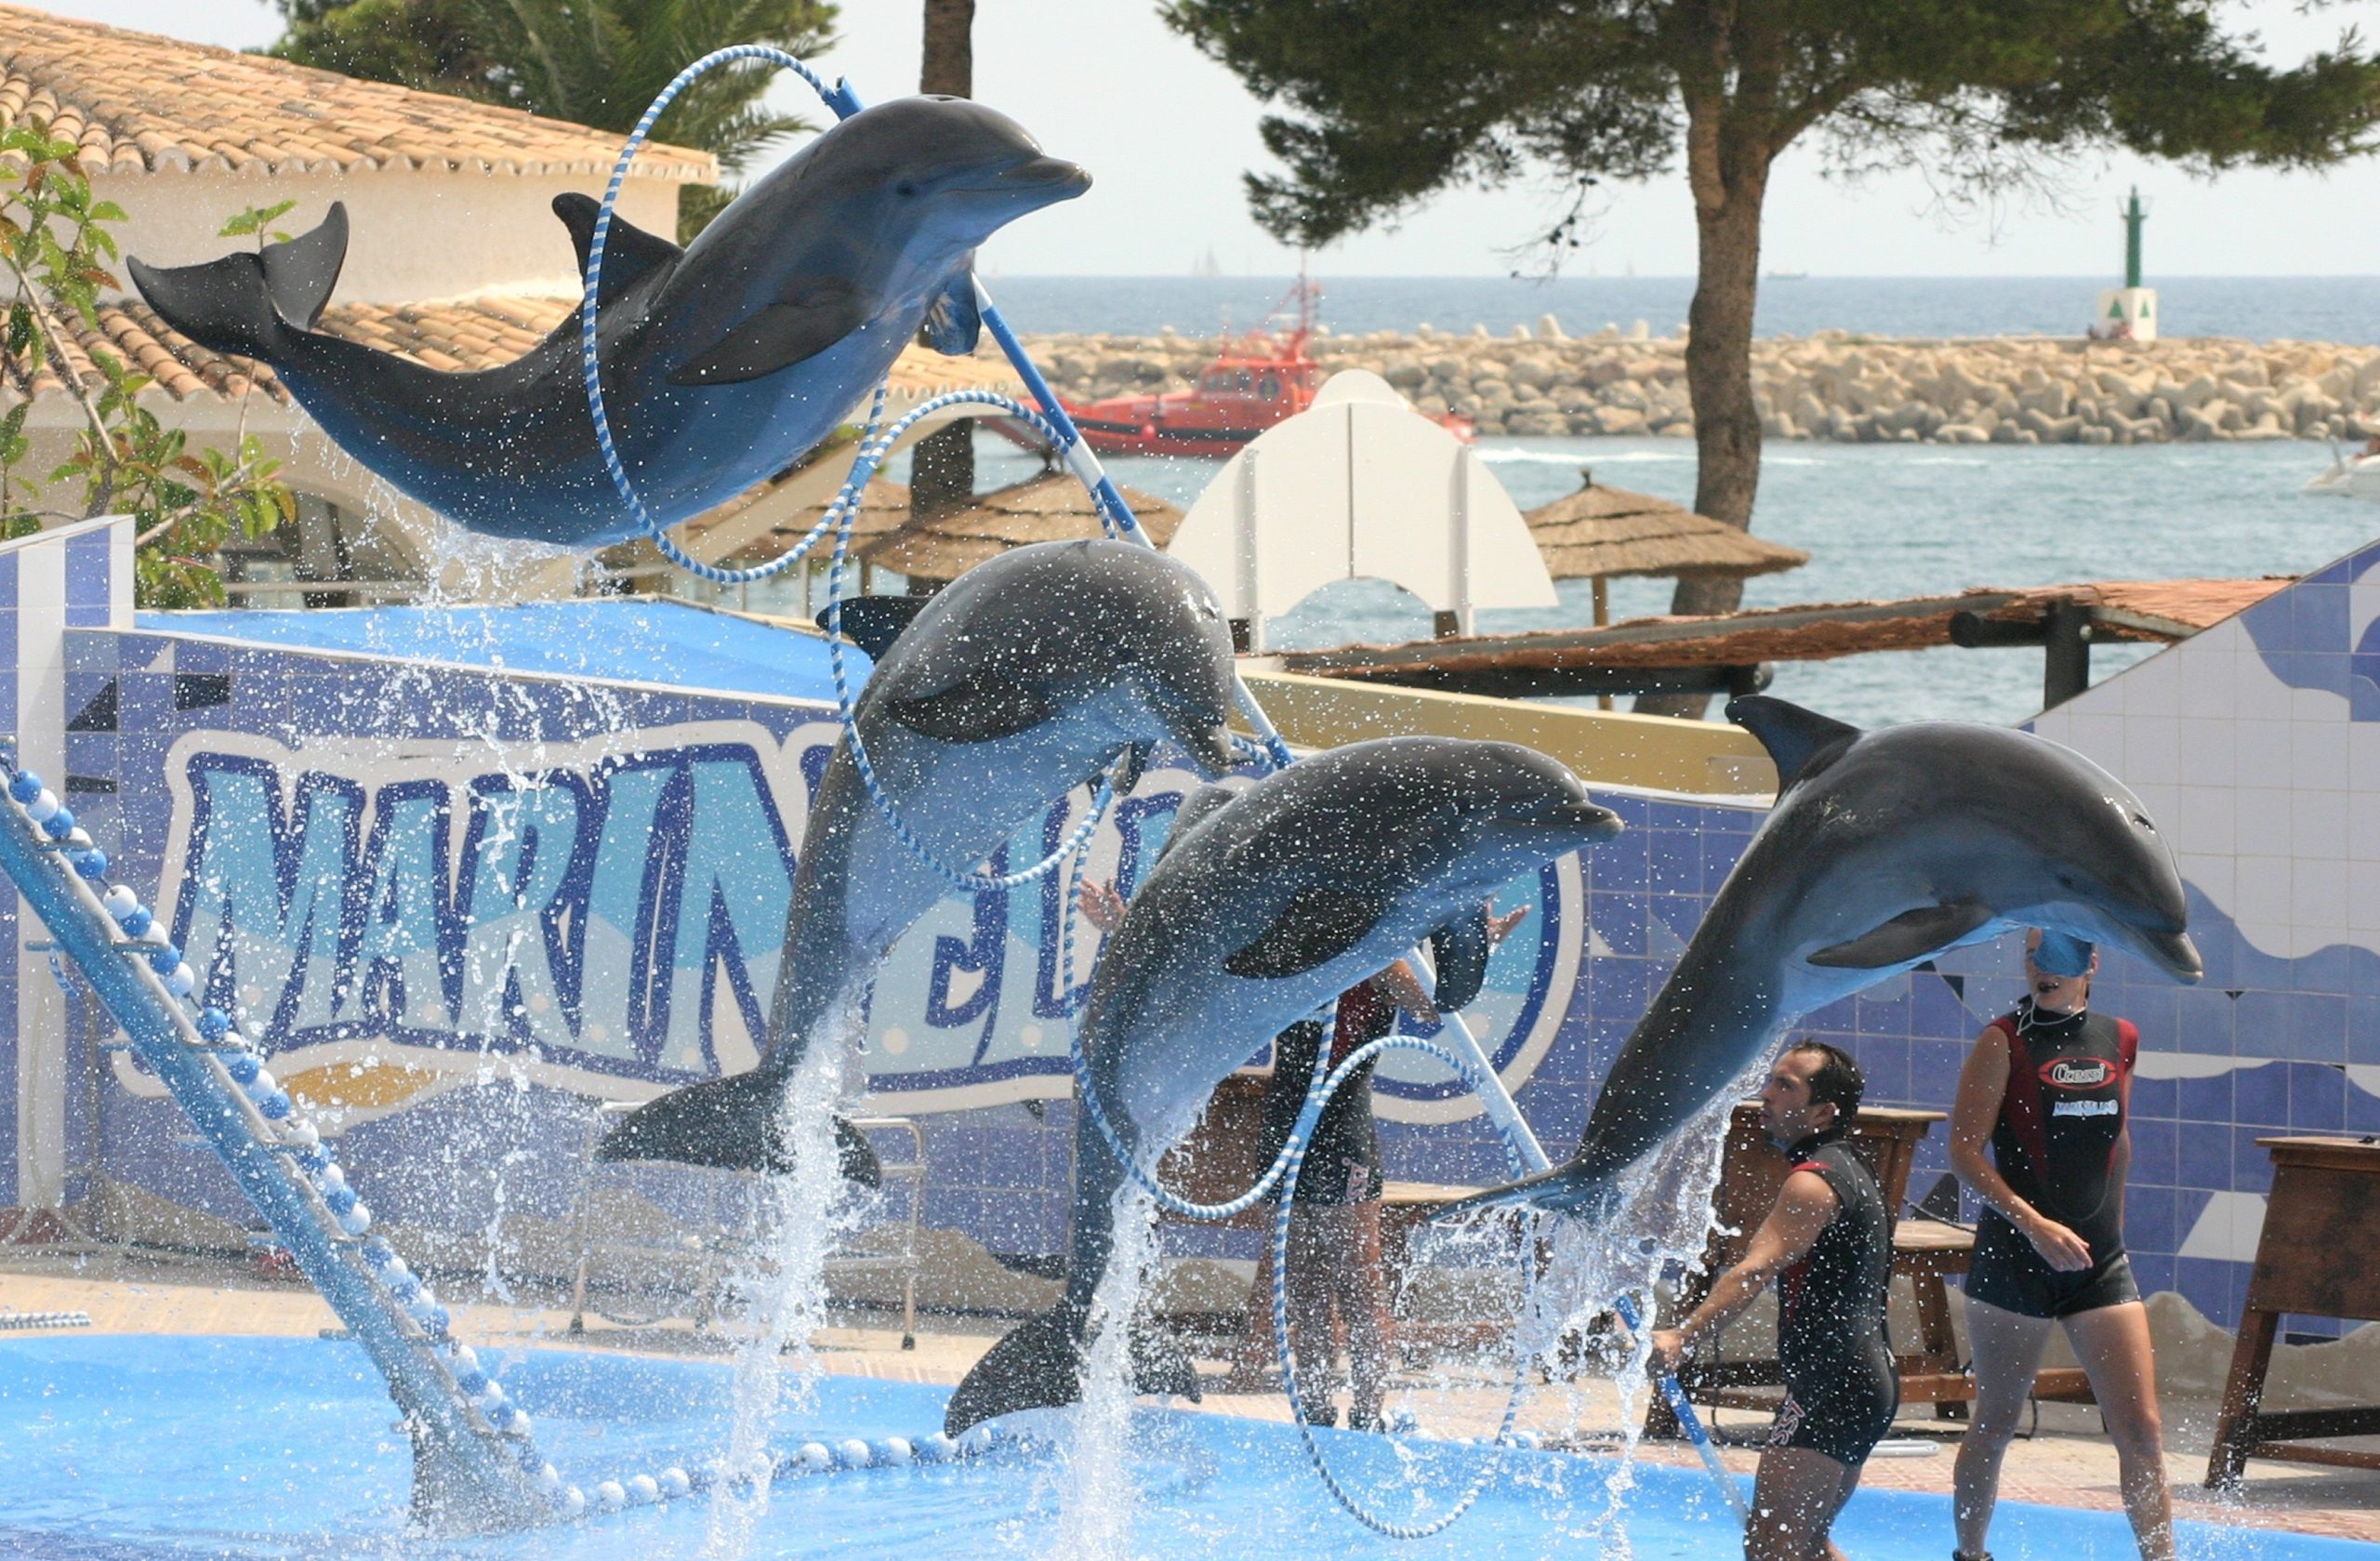 Gulfarium Dolphin show is a great thing to do for kids and adults